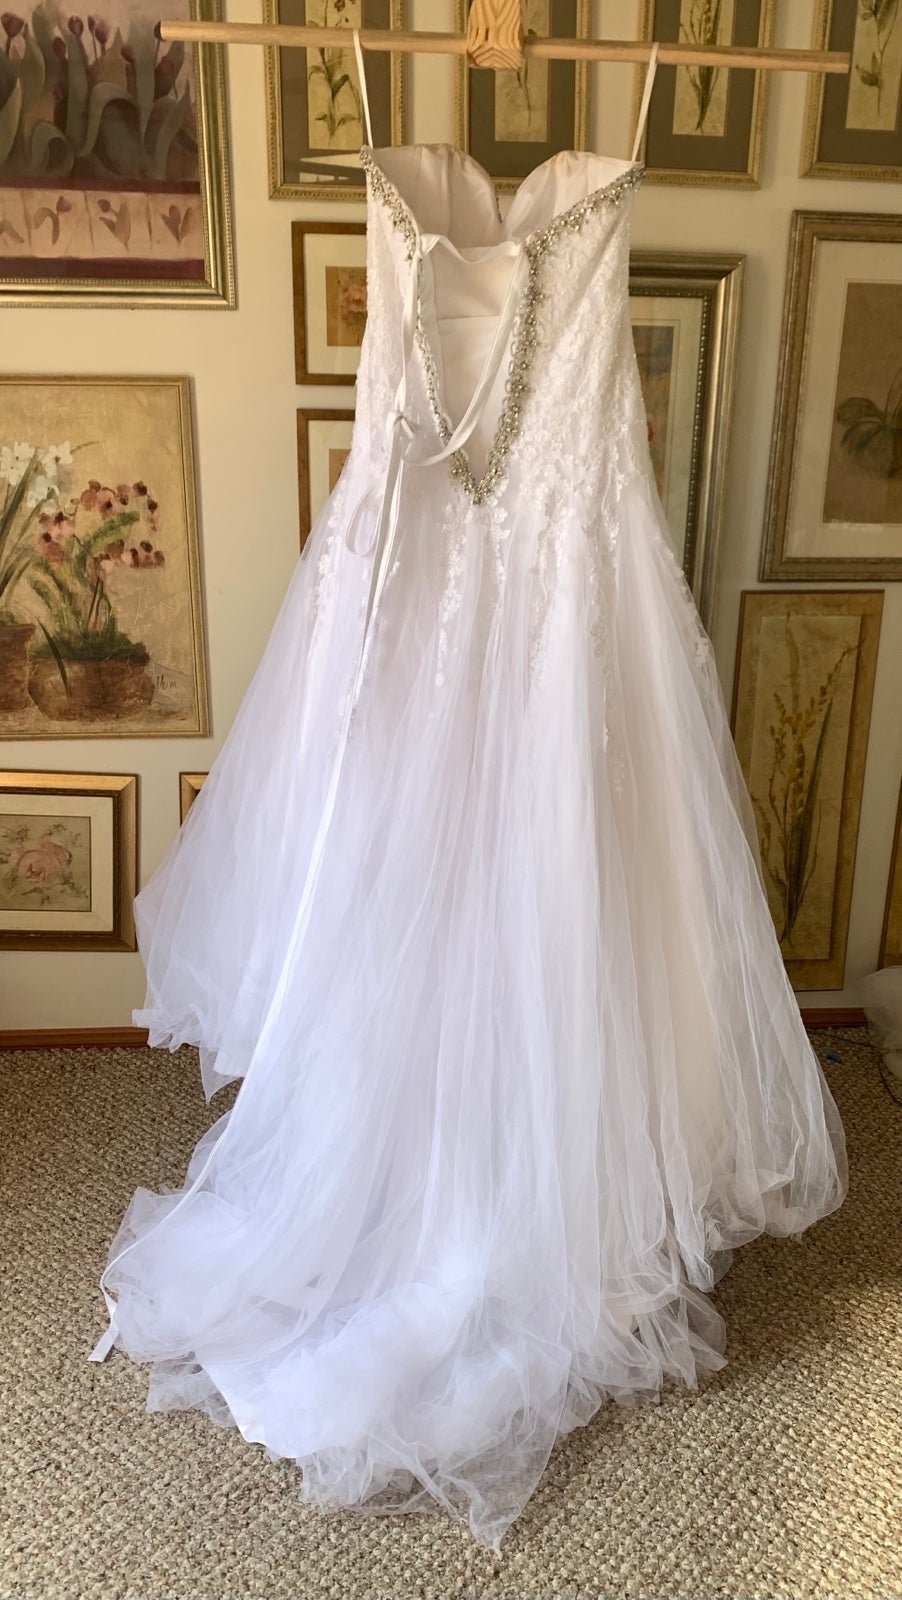 the Lowest price white lace strapless ball gown wedding dress pc4FBjzHg Factory Price